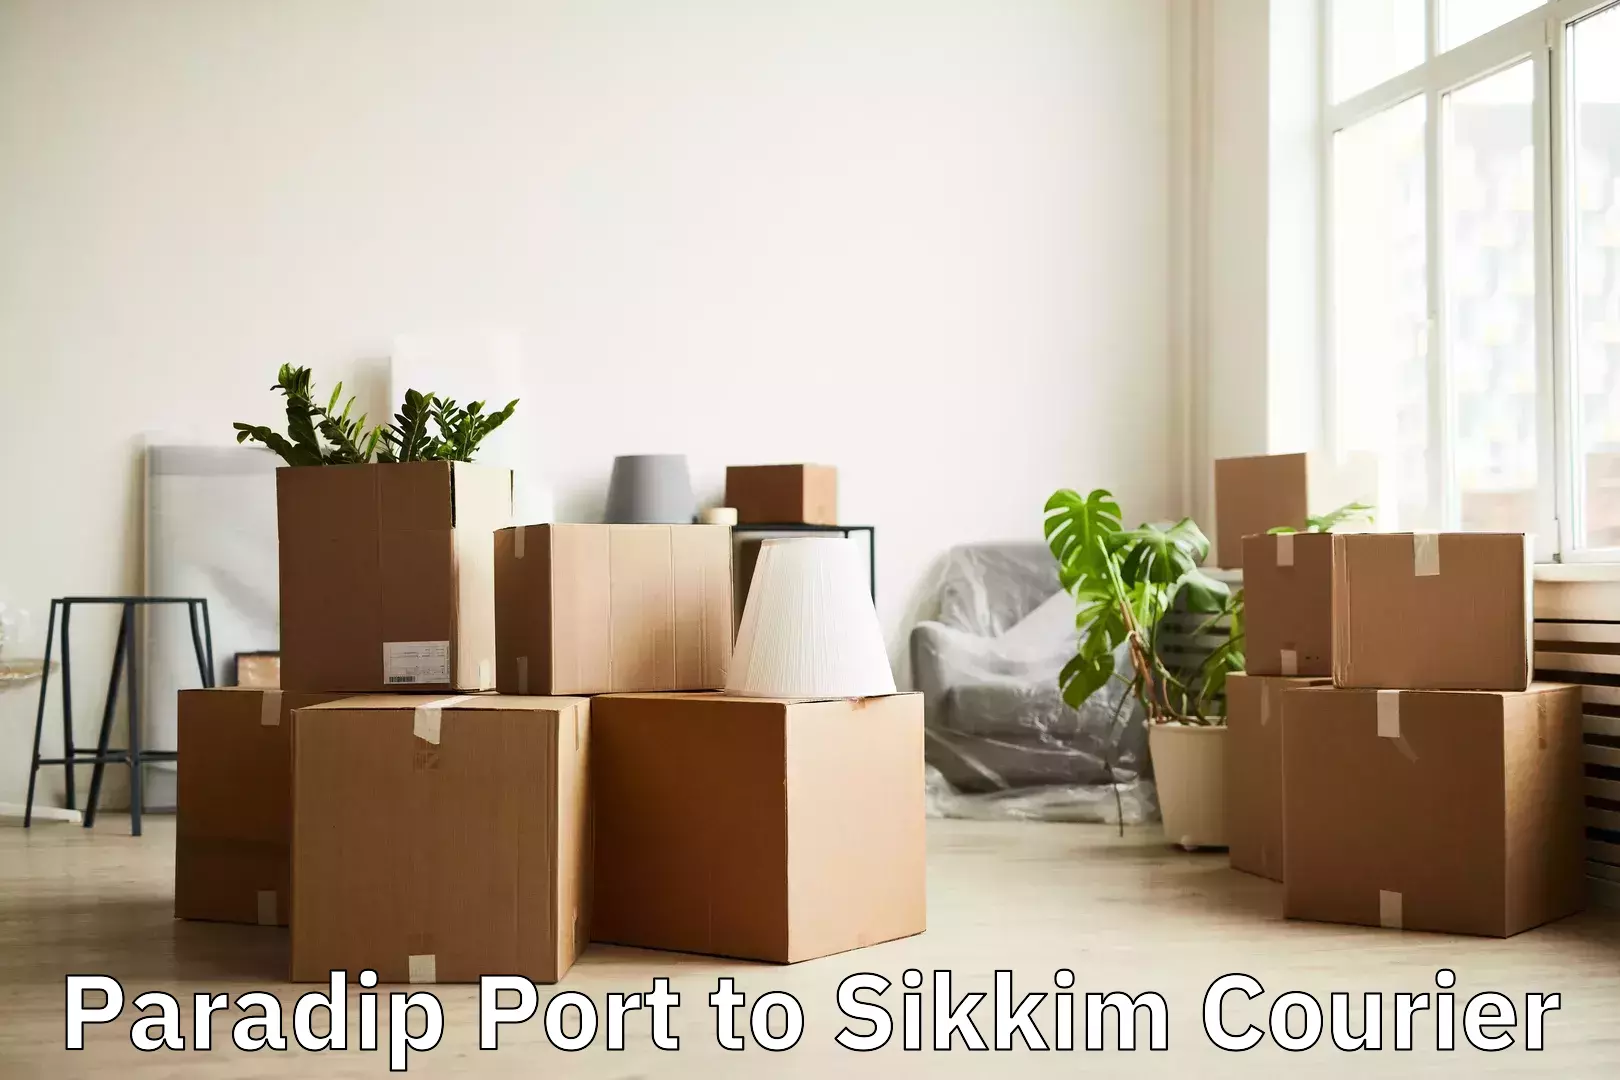 Luggage shipment tracking Paradip Port to North Sikkim